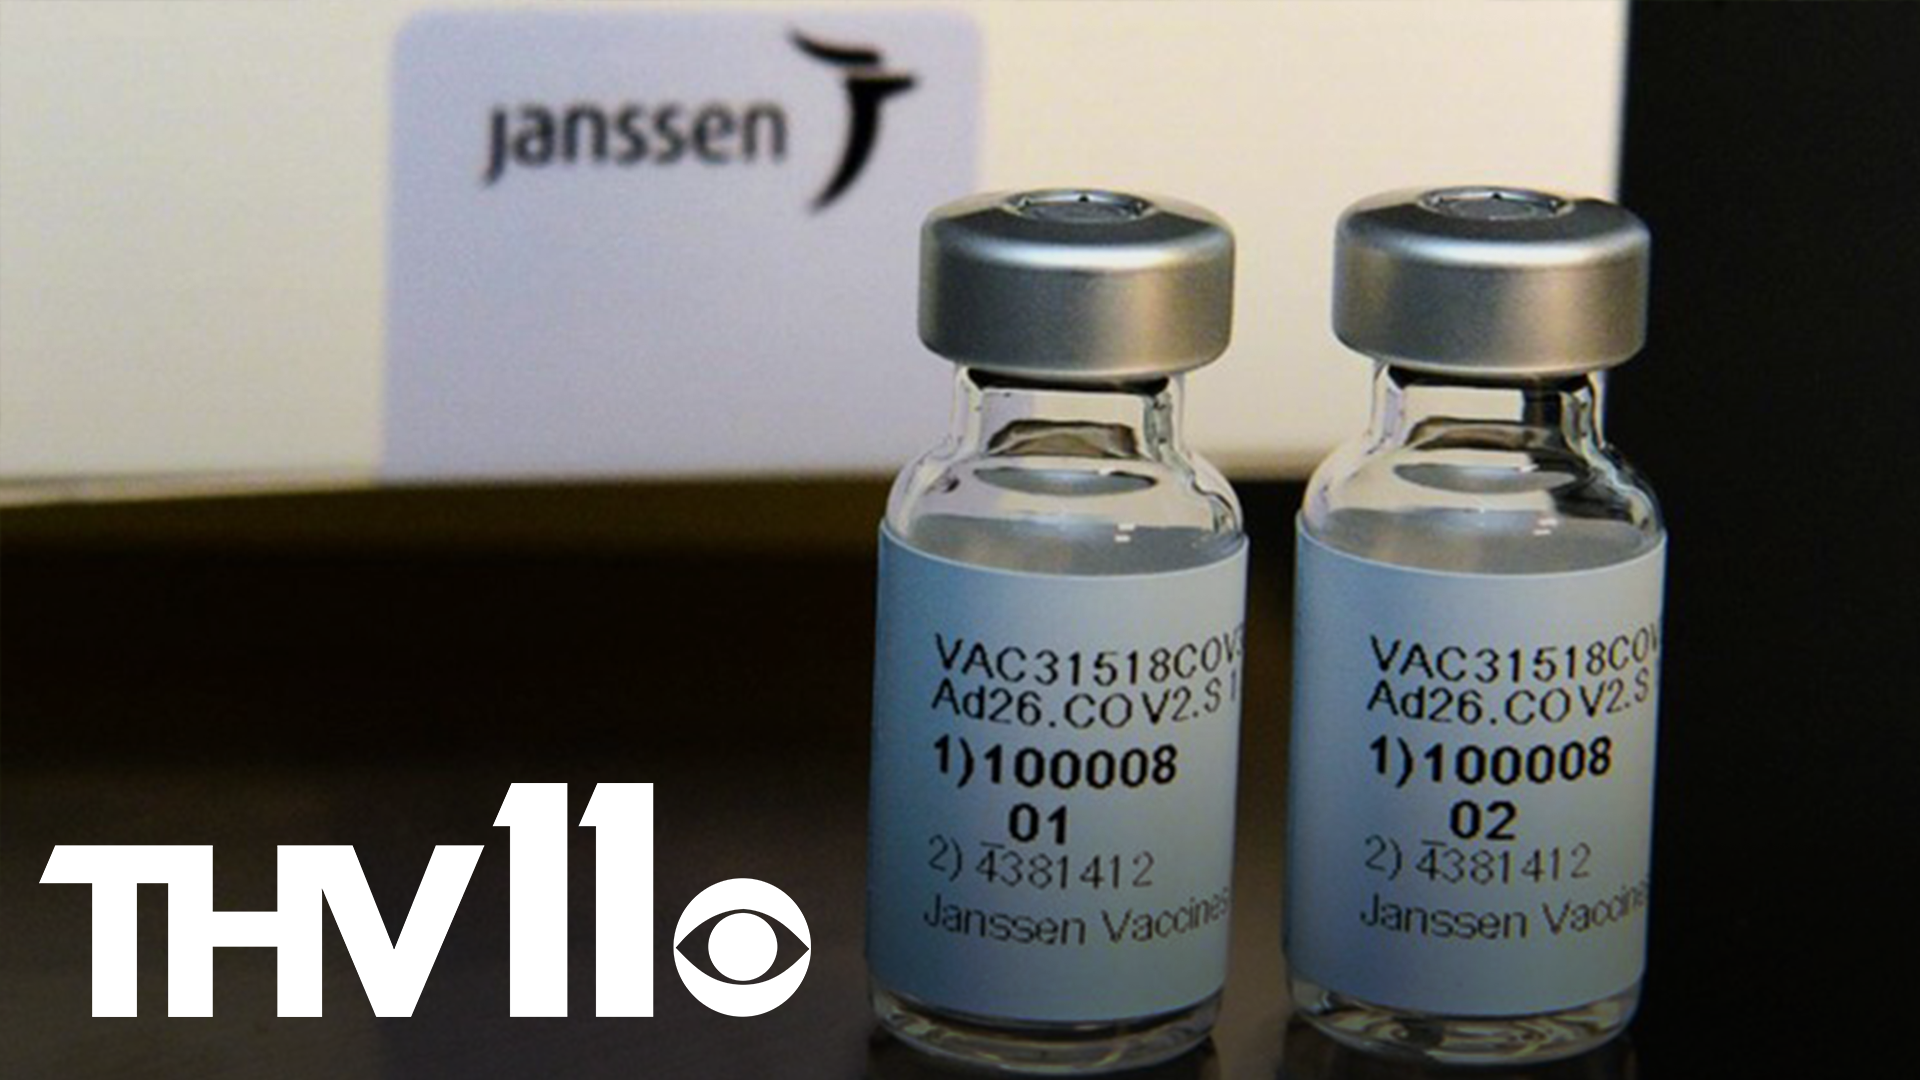 The company announced its results from its phase three trial on Friday. It showed its vaccine is 85% effective against COVID-19.